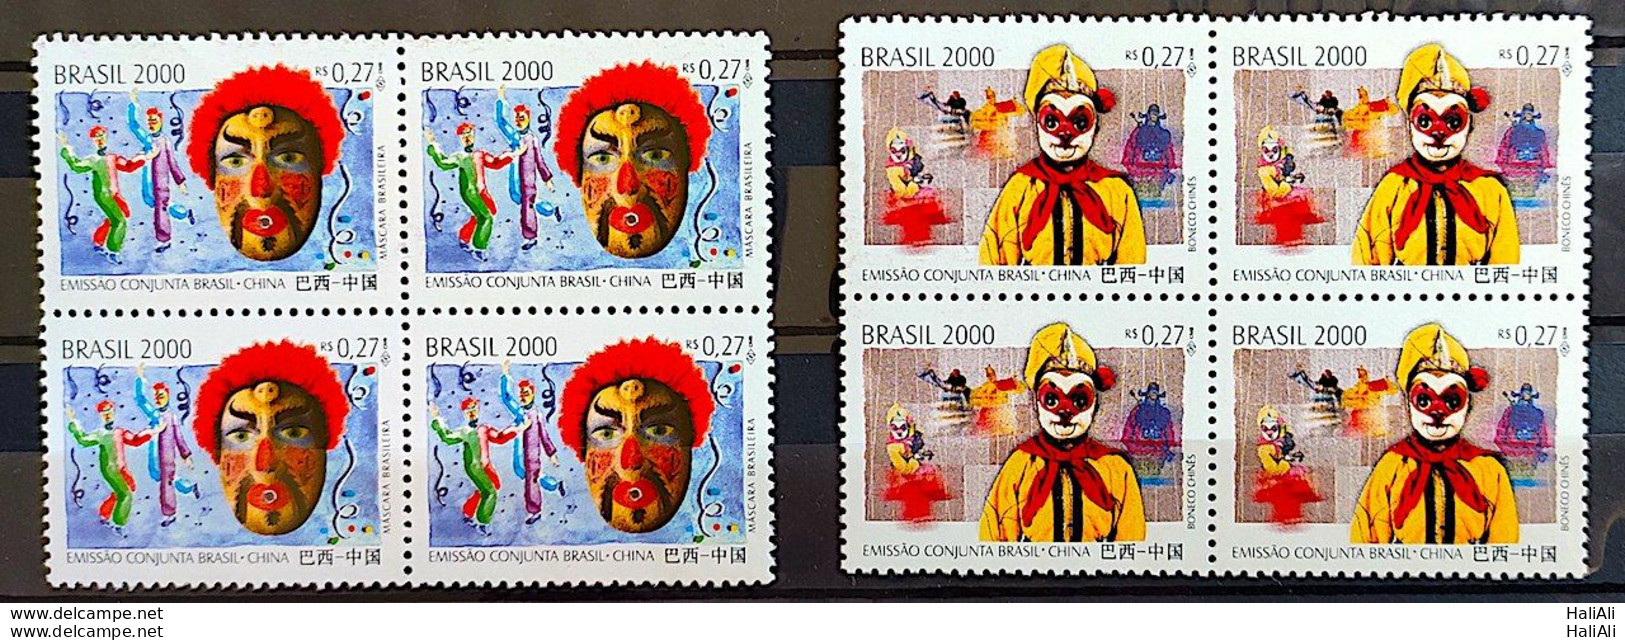 C 2343 Brazil Stamp Joint Issue Brazil China Mask 2000 Block Of 4 - Unused Stamps